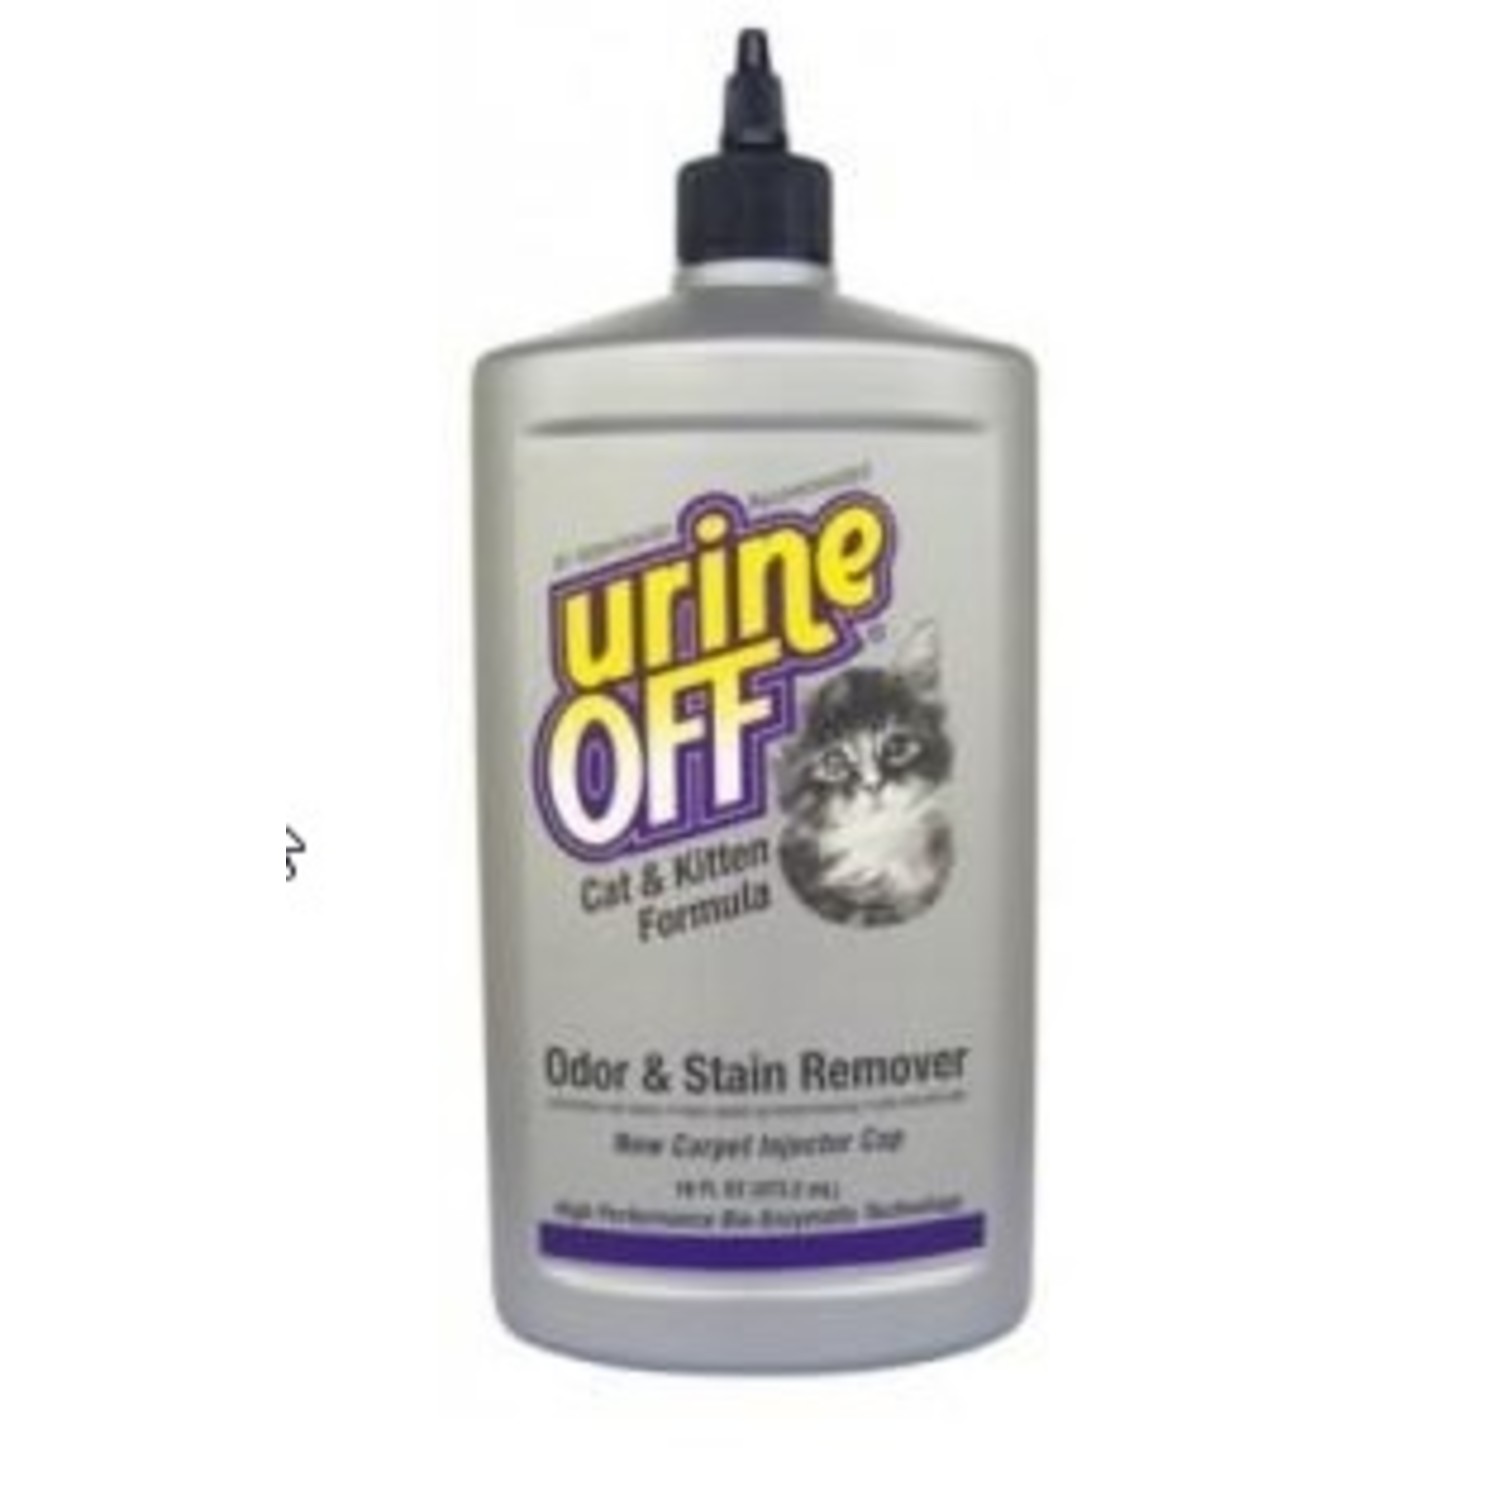 Urine Off Cat and Kitten injector - Mypetworld